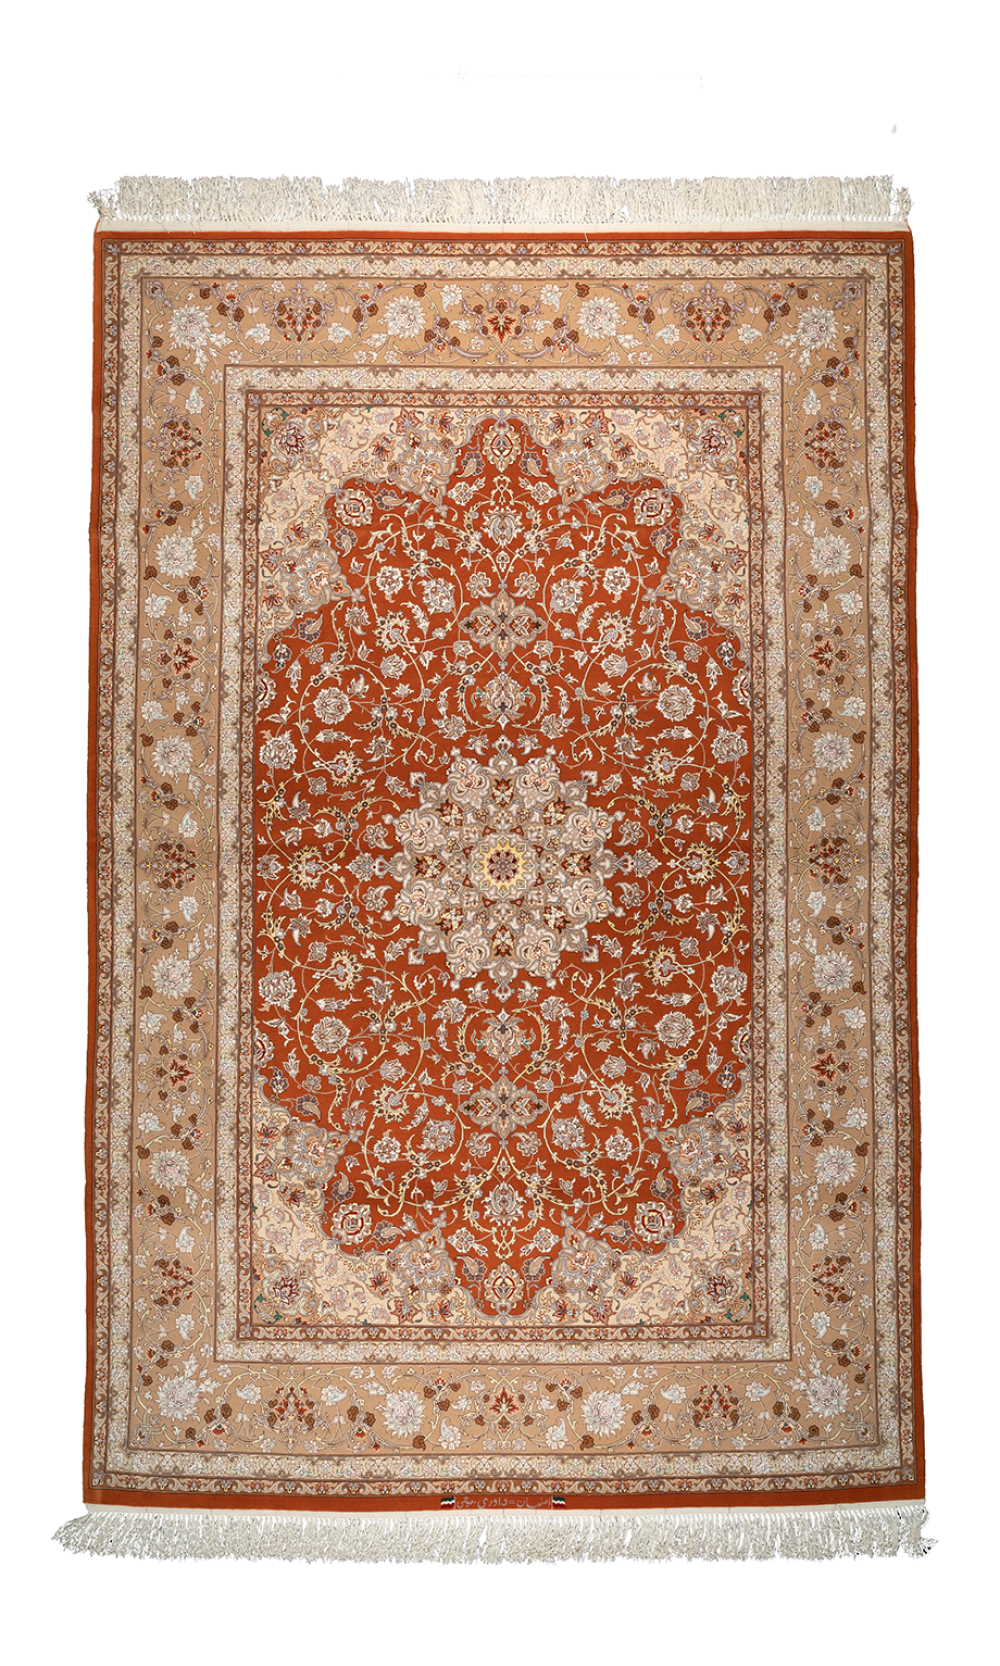 HANDMADE RUG IN SUPER FINE WOOL & COPPER COLOR ISFAHAN